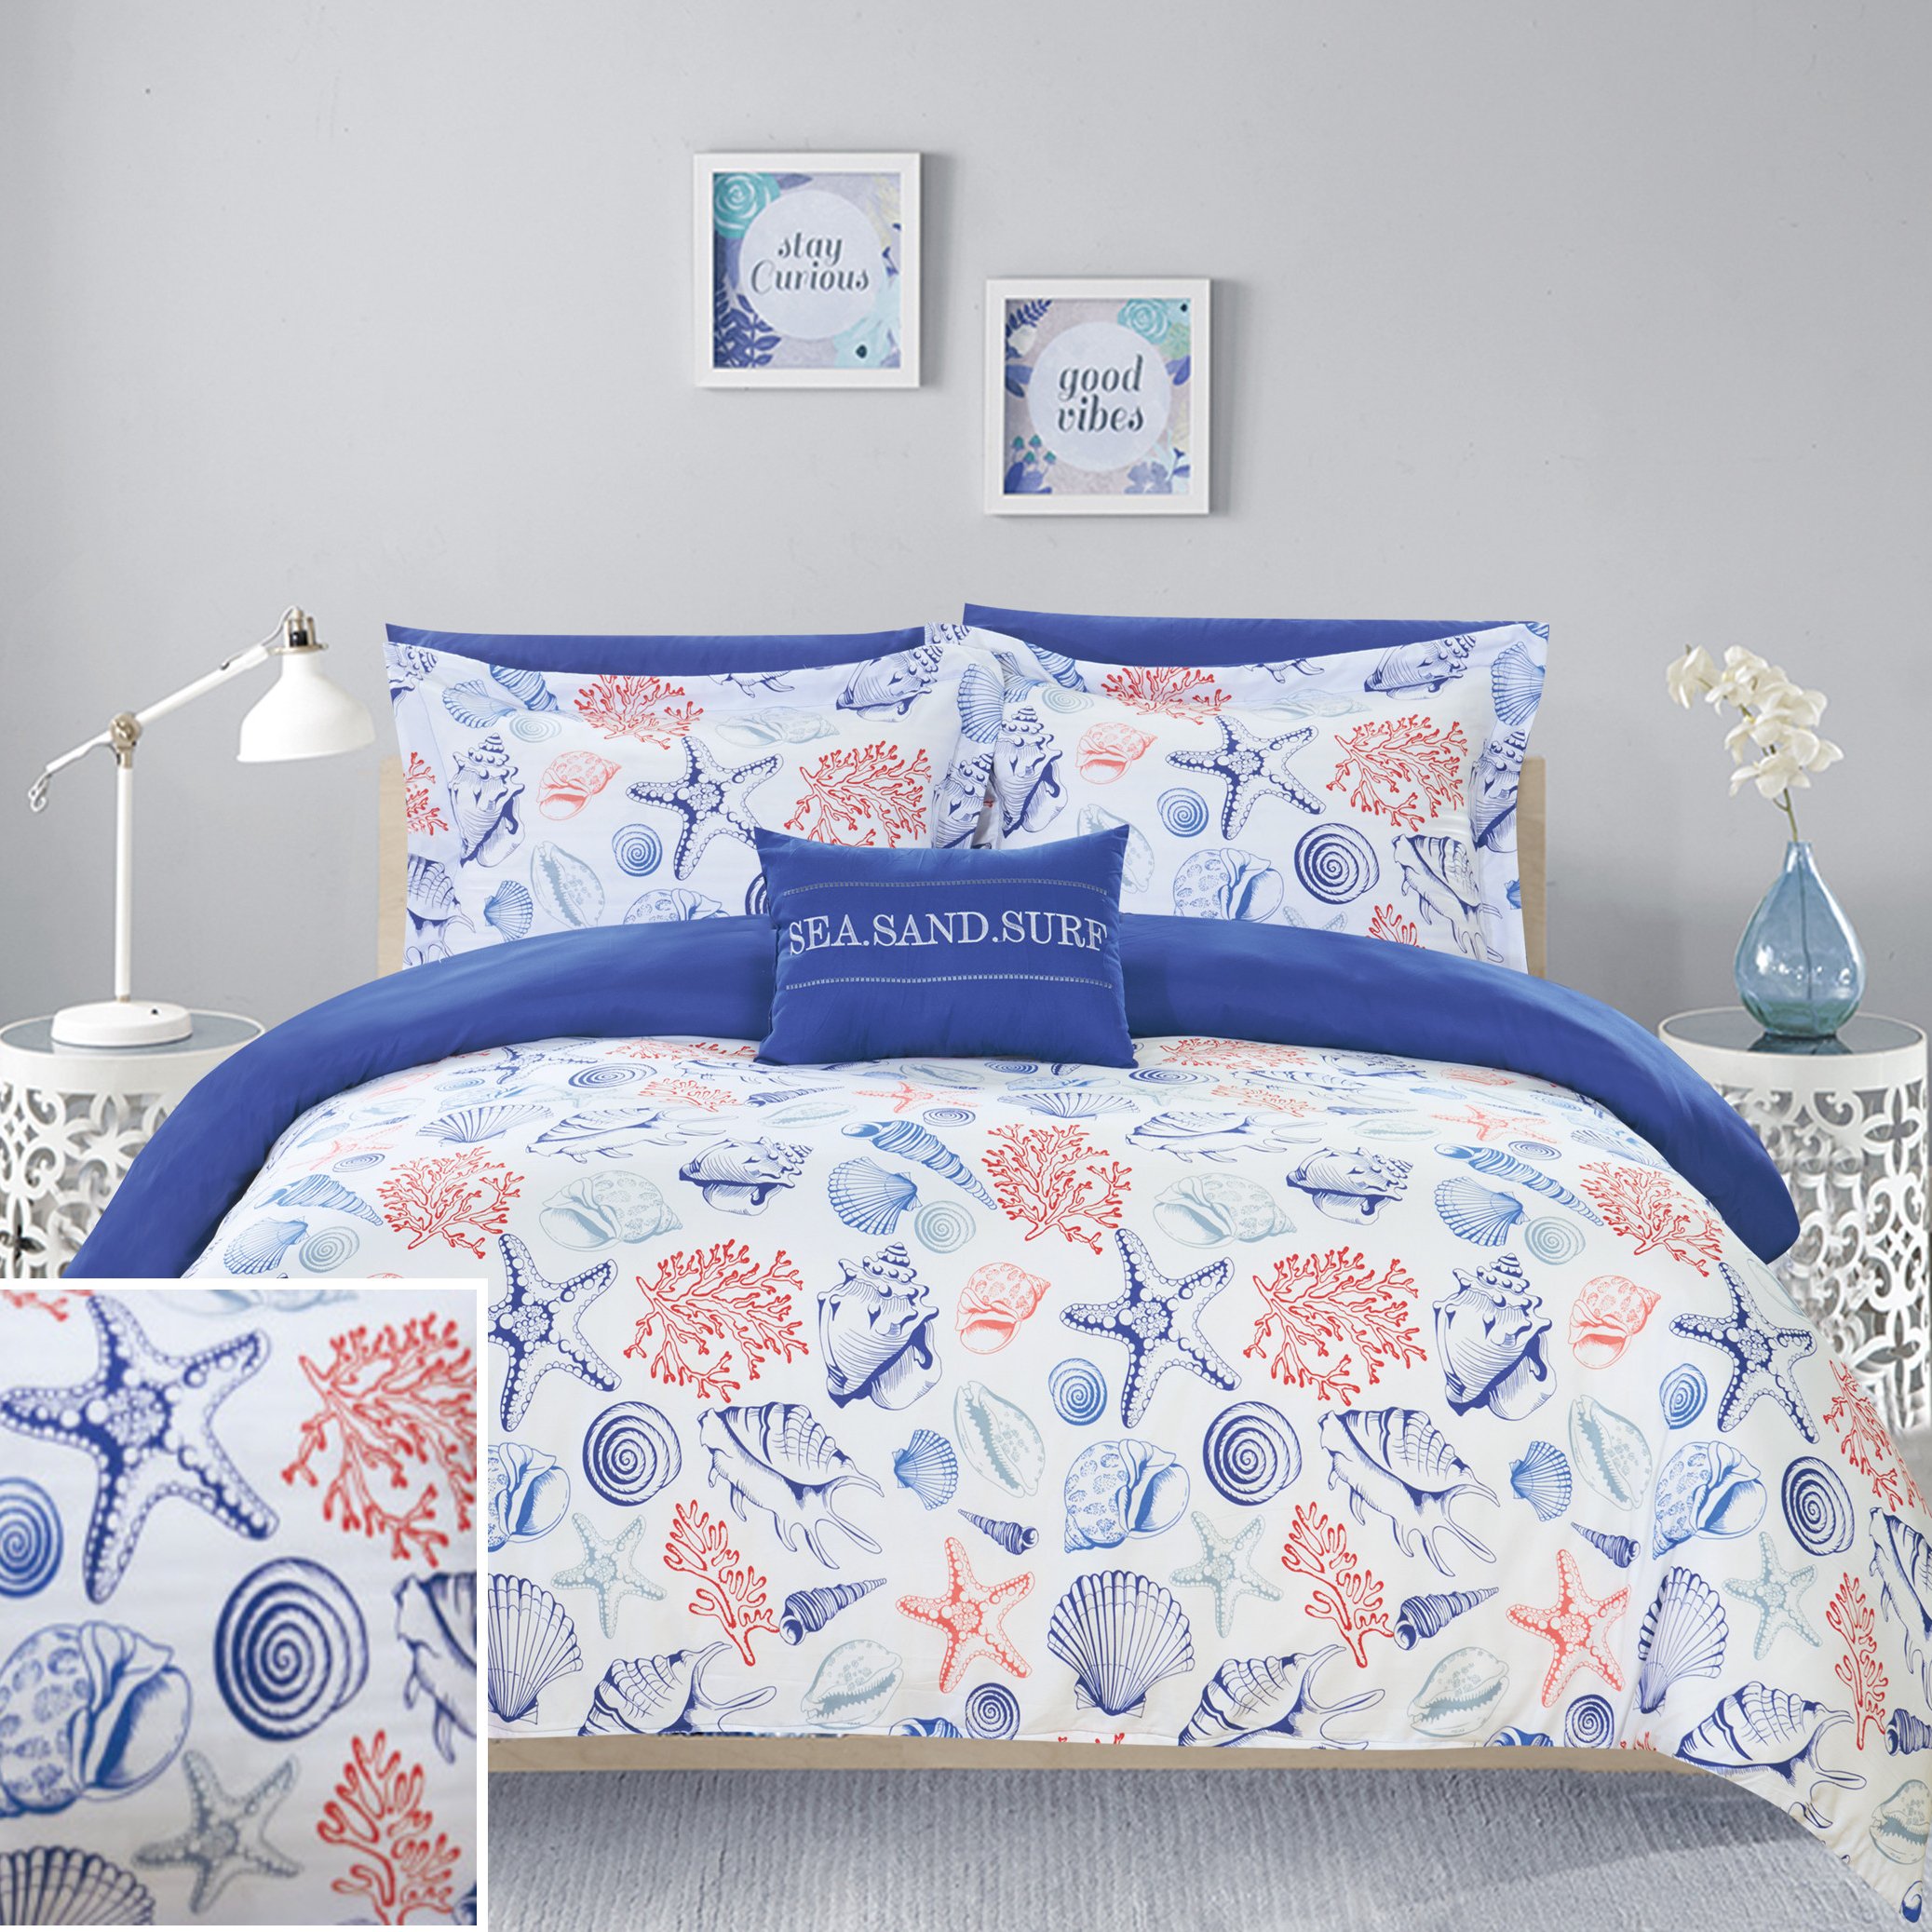 8 Or 6 Piece Reversible Comforter Set Sea, Sand, Surf Theme Print Design Bed In A Bag - Navy, Queen